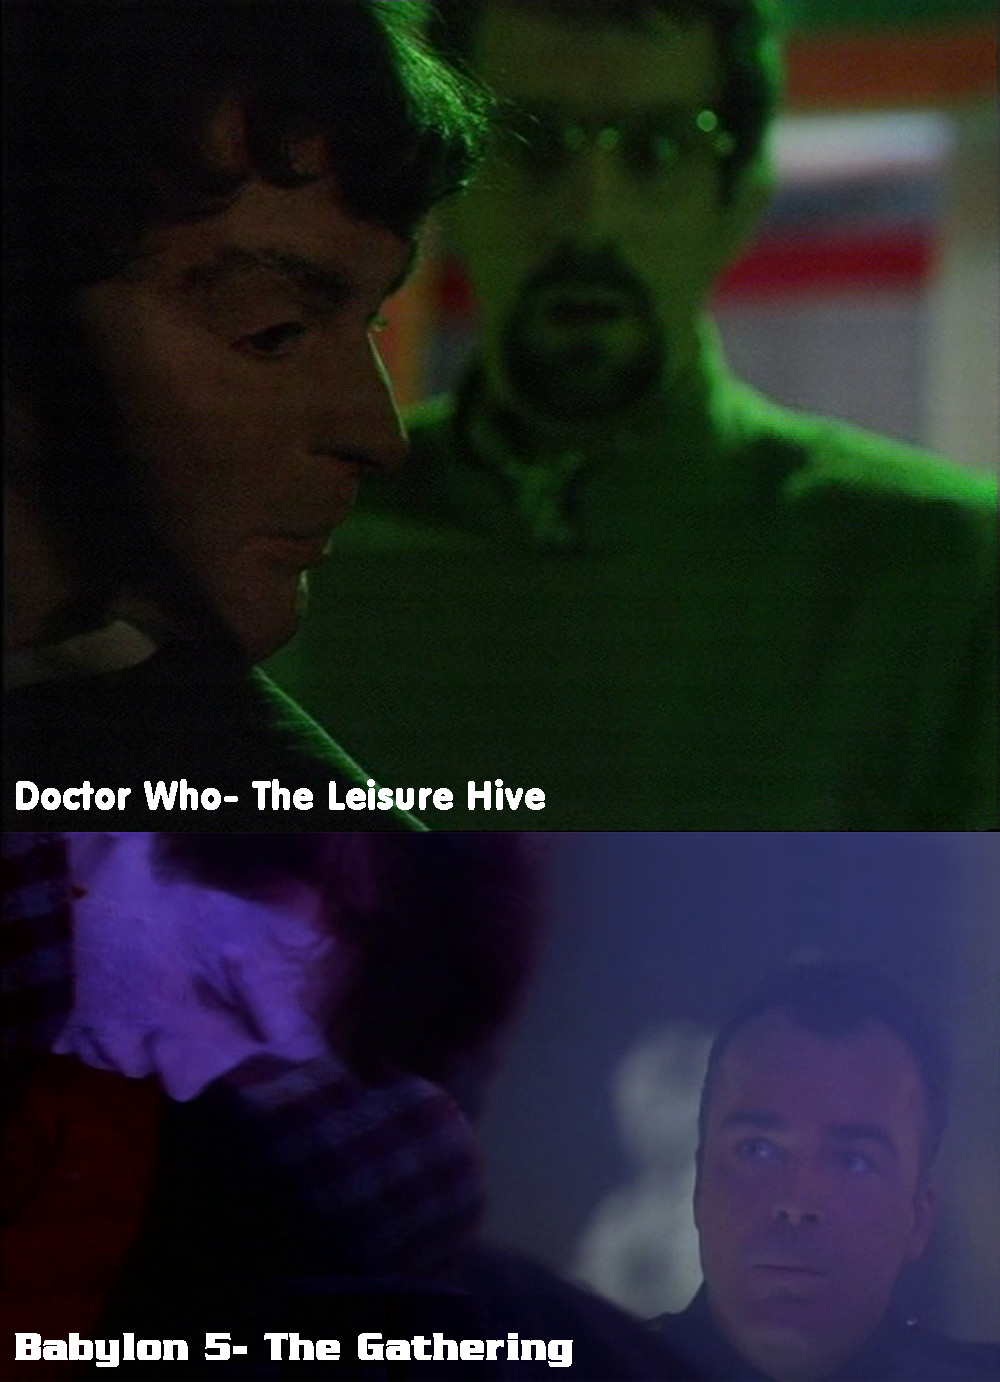 Top: A shot from The Leisure Hive where Stimpson discovers the rubber suit  a Foamasi has been wearing to impersonate Klout. Bottom: A similar shot where a character from Babylon 5 discovers something similar.